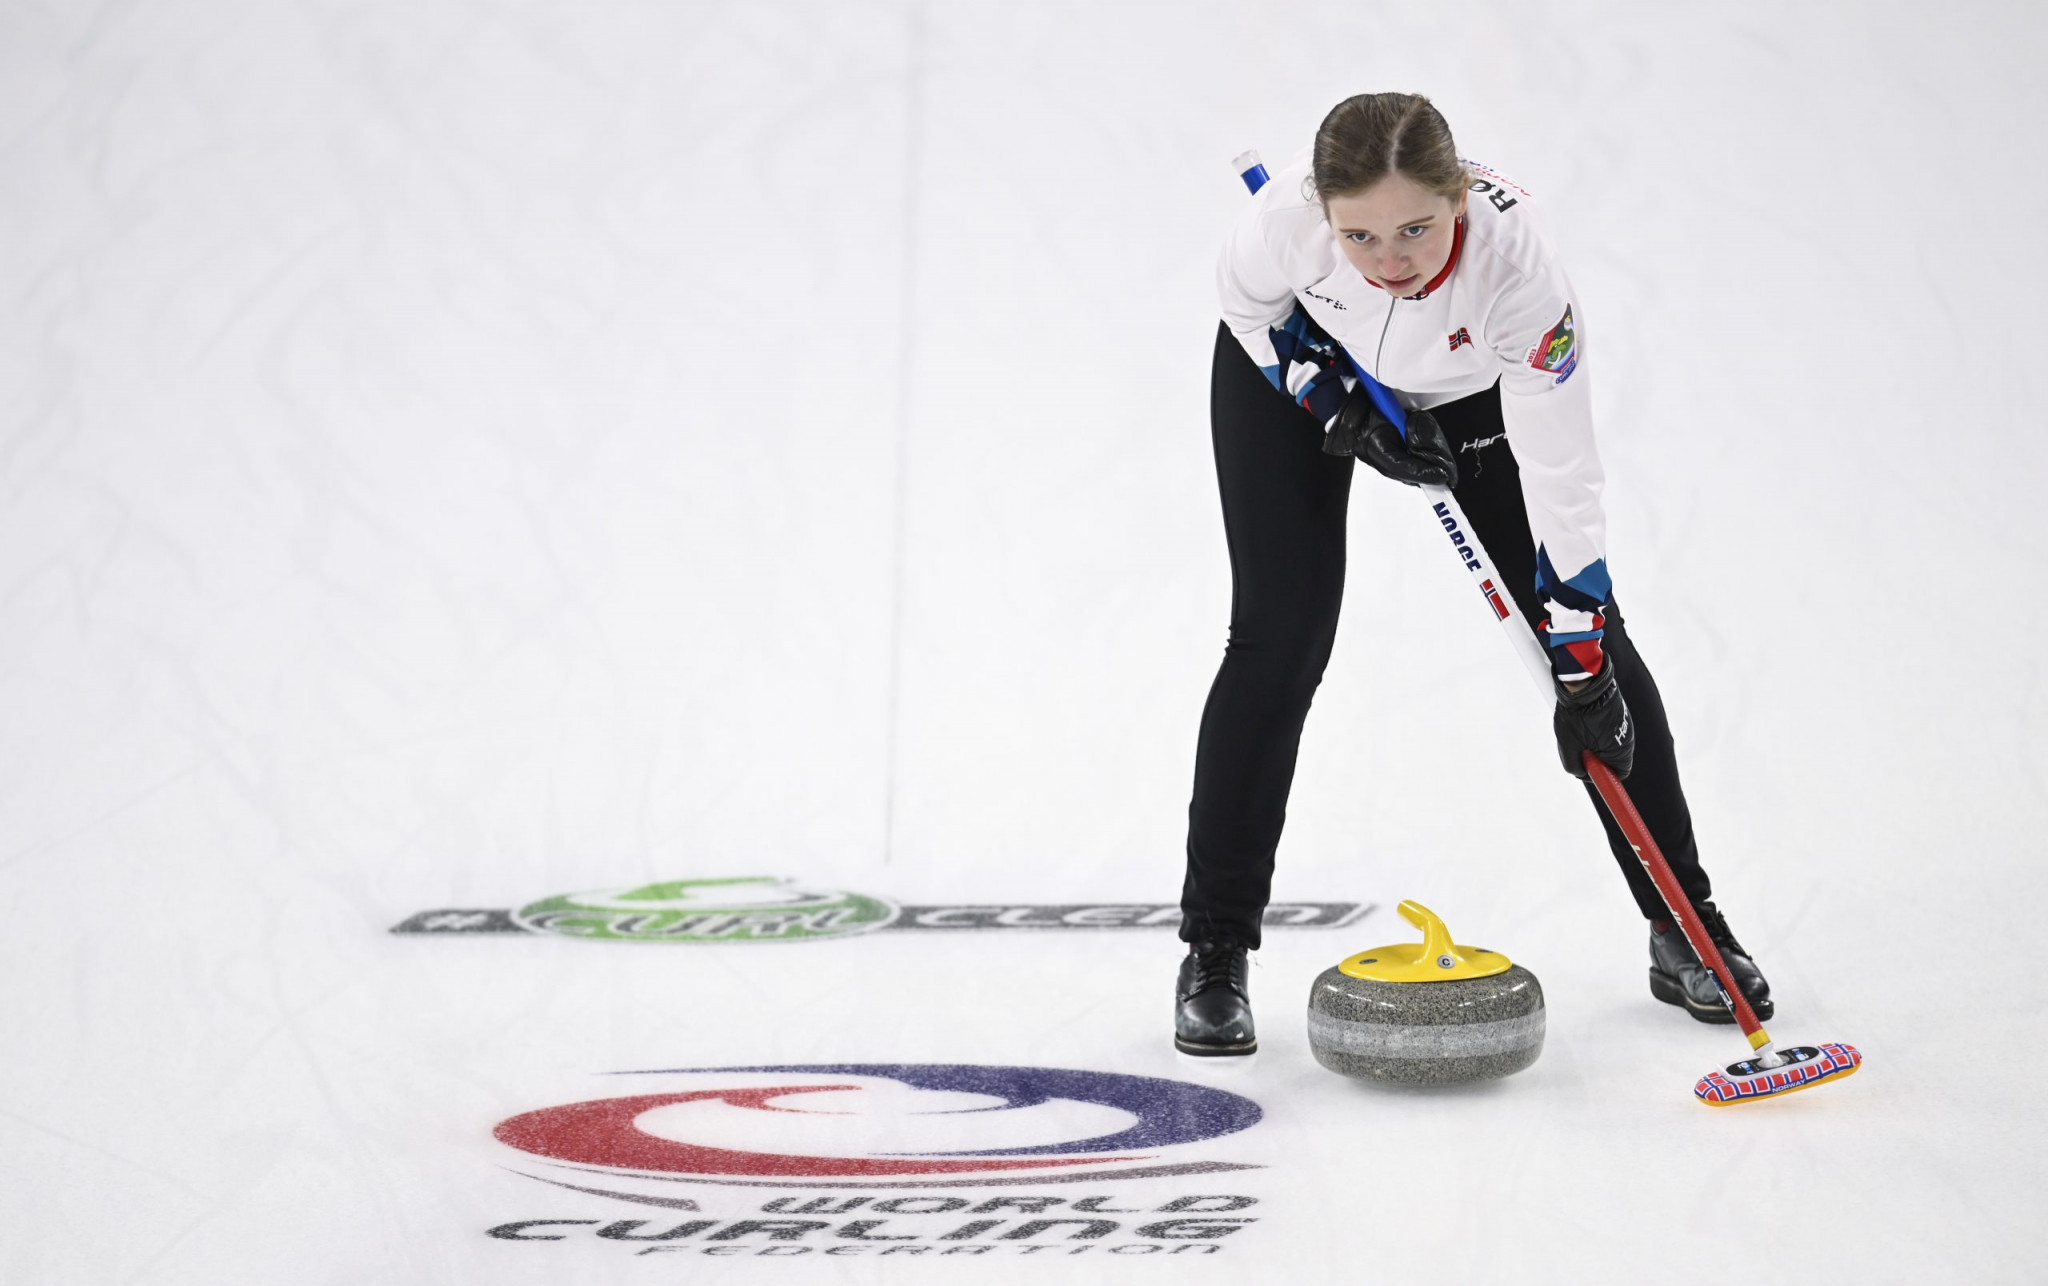 Undefeated streaks extended by Japan and Norway at World Mixed Doubles Championship